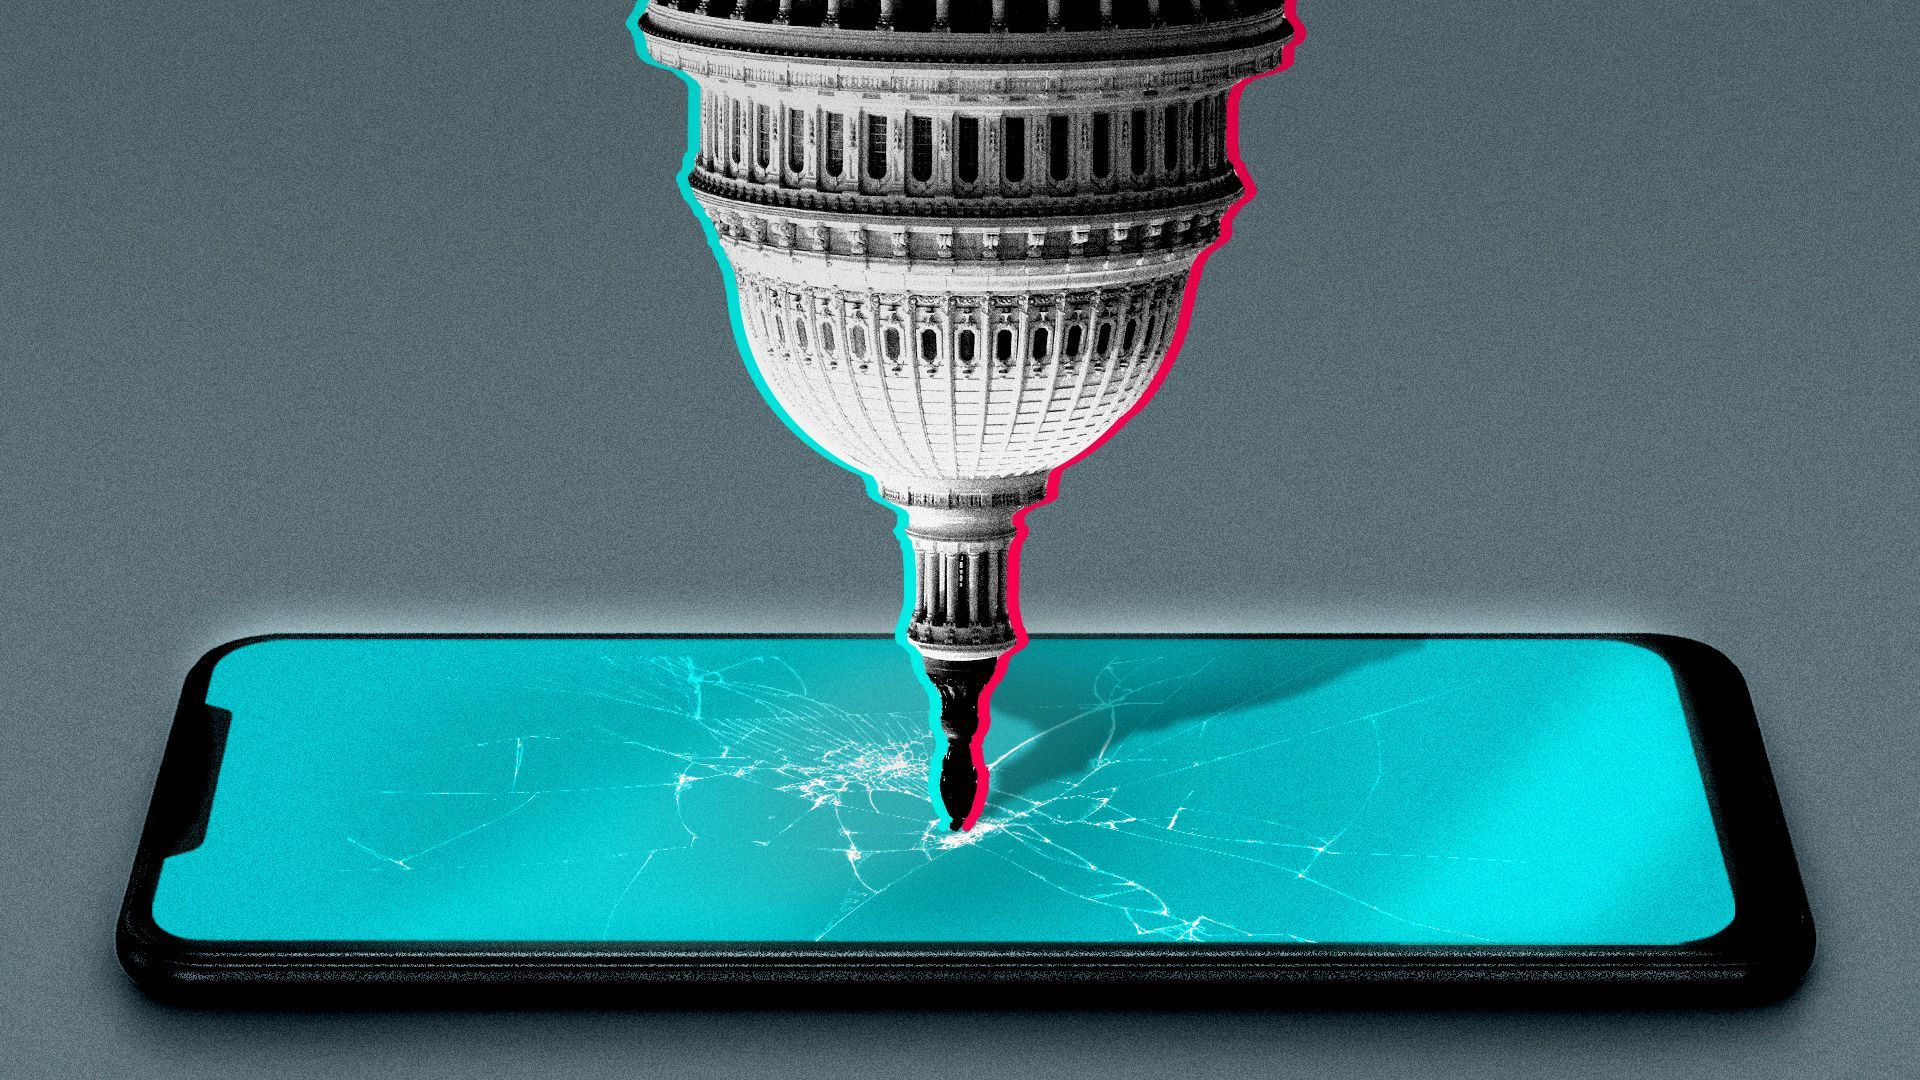 Illustration of the US Capitol dome piercing a smart phone. The Capitol has pink and blue strokes in the colors and style of Tik Tok's logo.